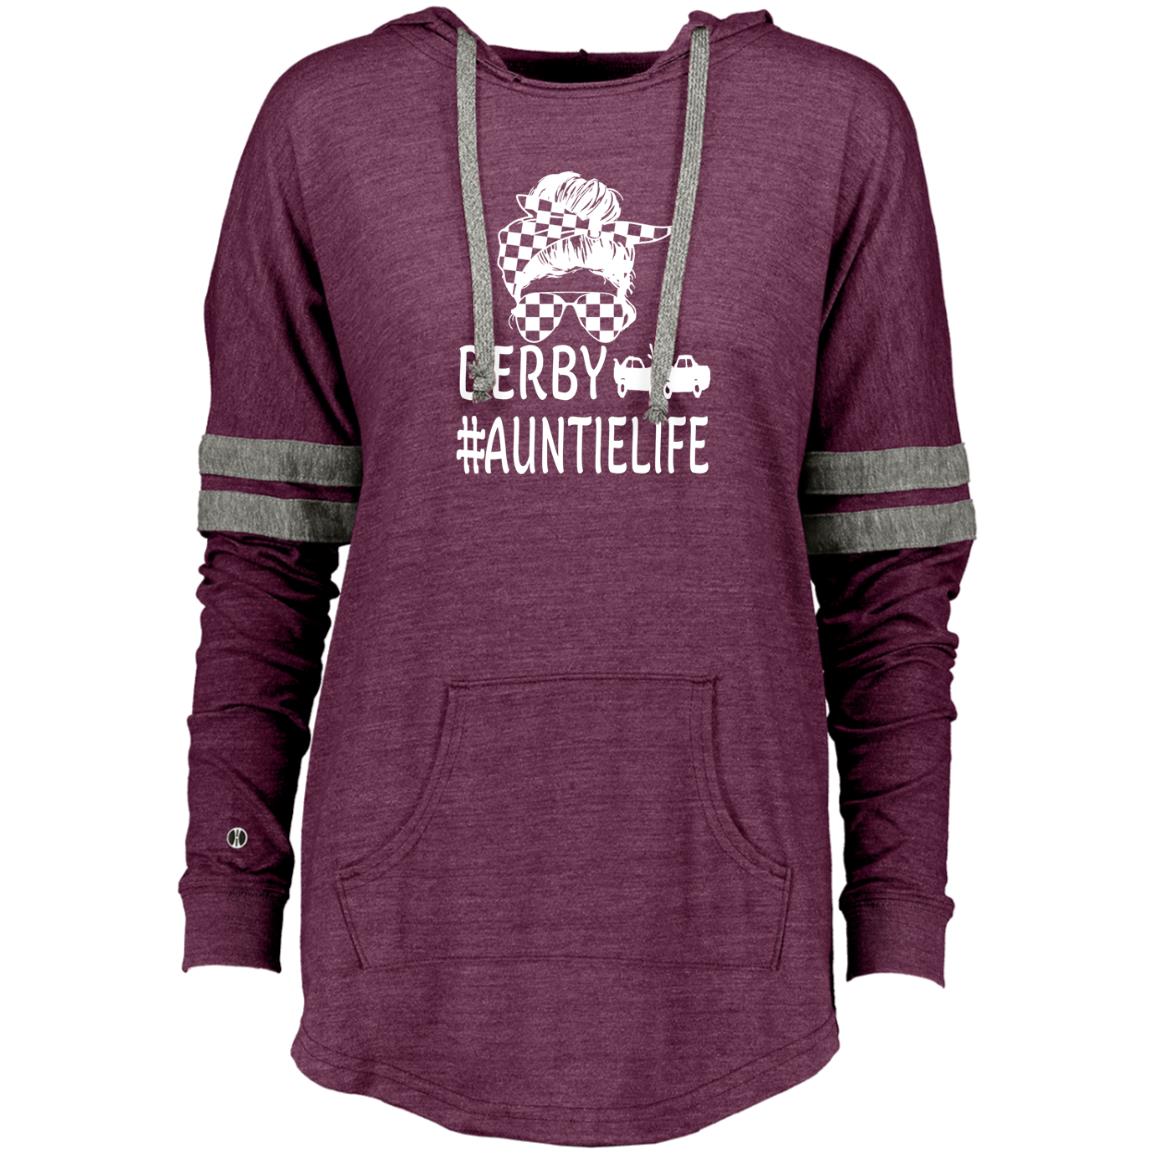 Derby Auntie Life Ladies Hooded Low Key Pullover